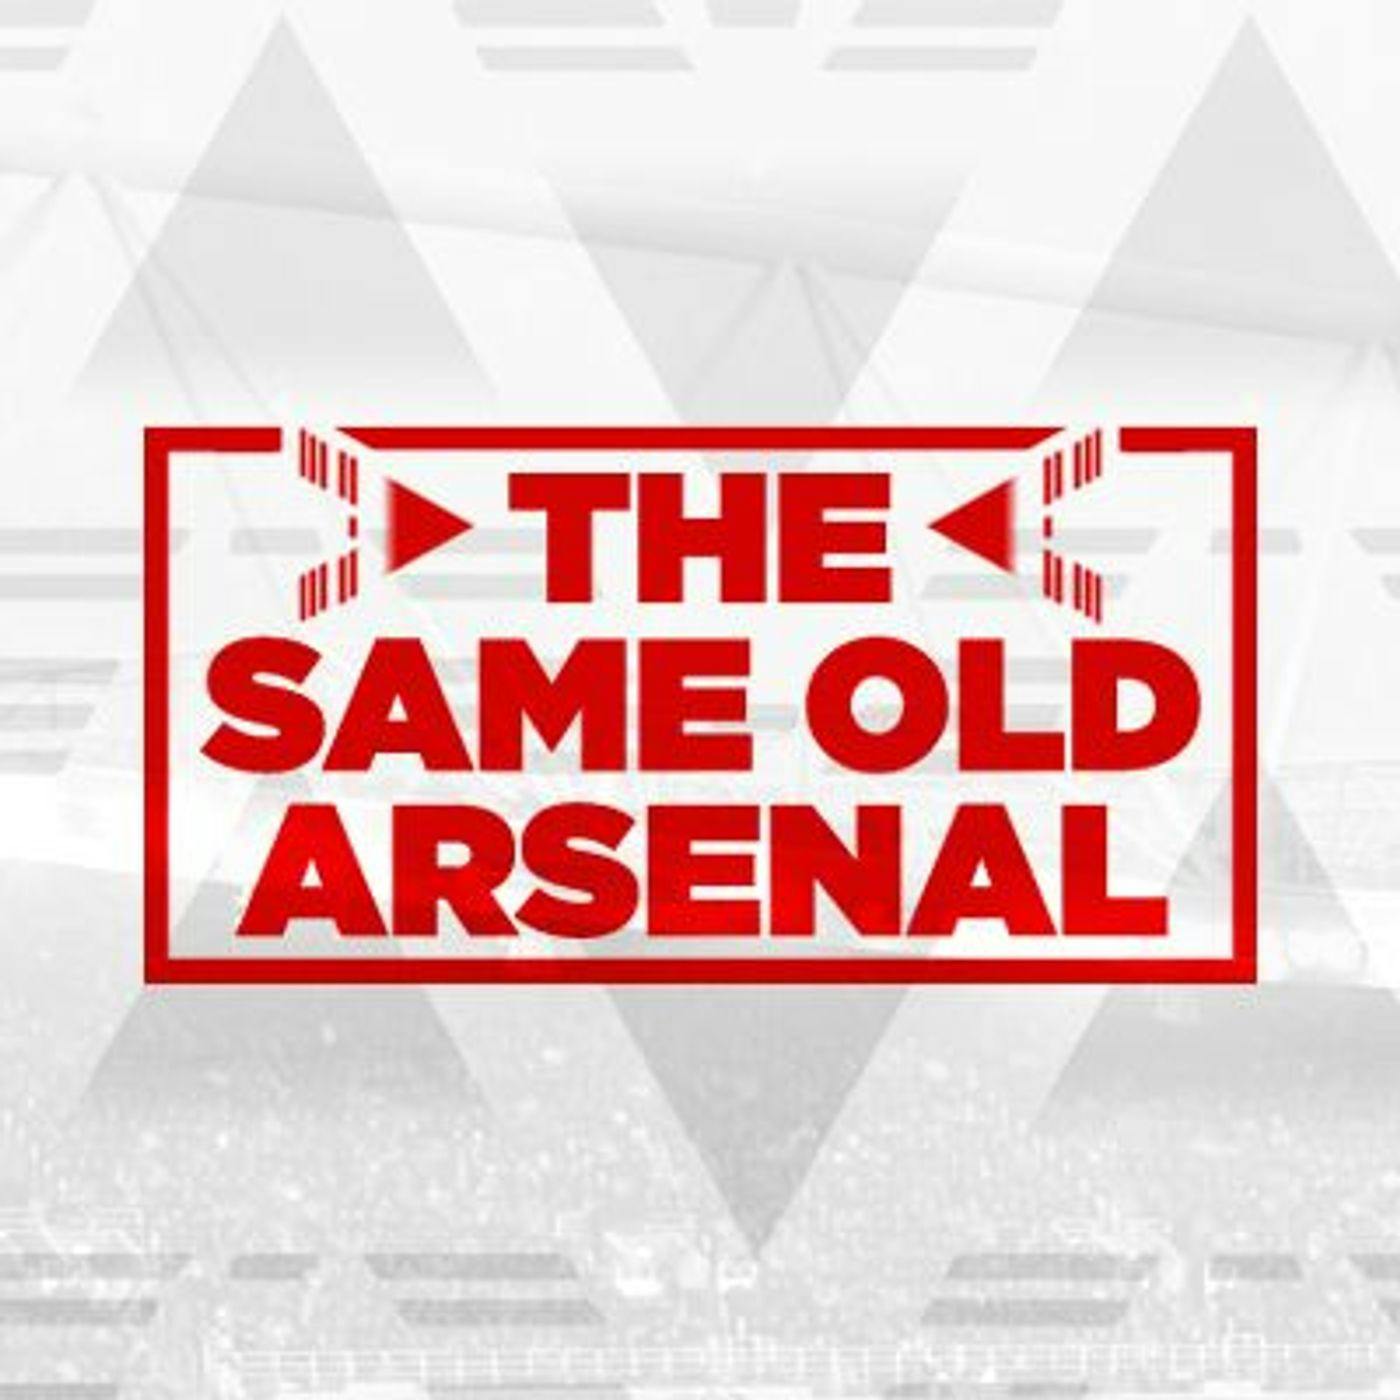 We are BACK for the new season: 21/22 Arsenal FC Season preview.